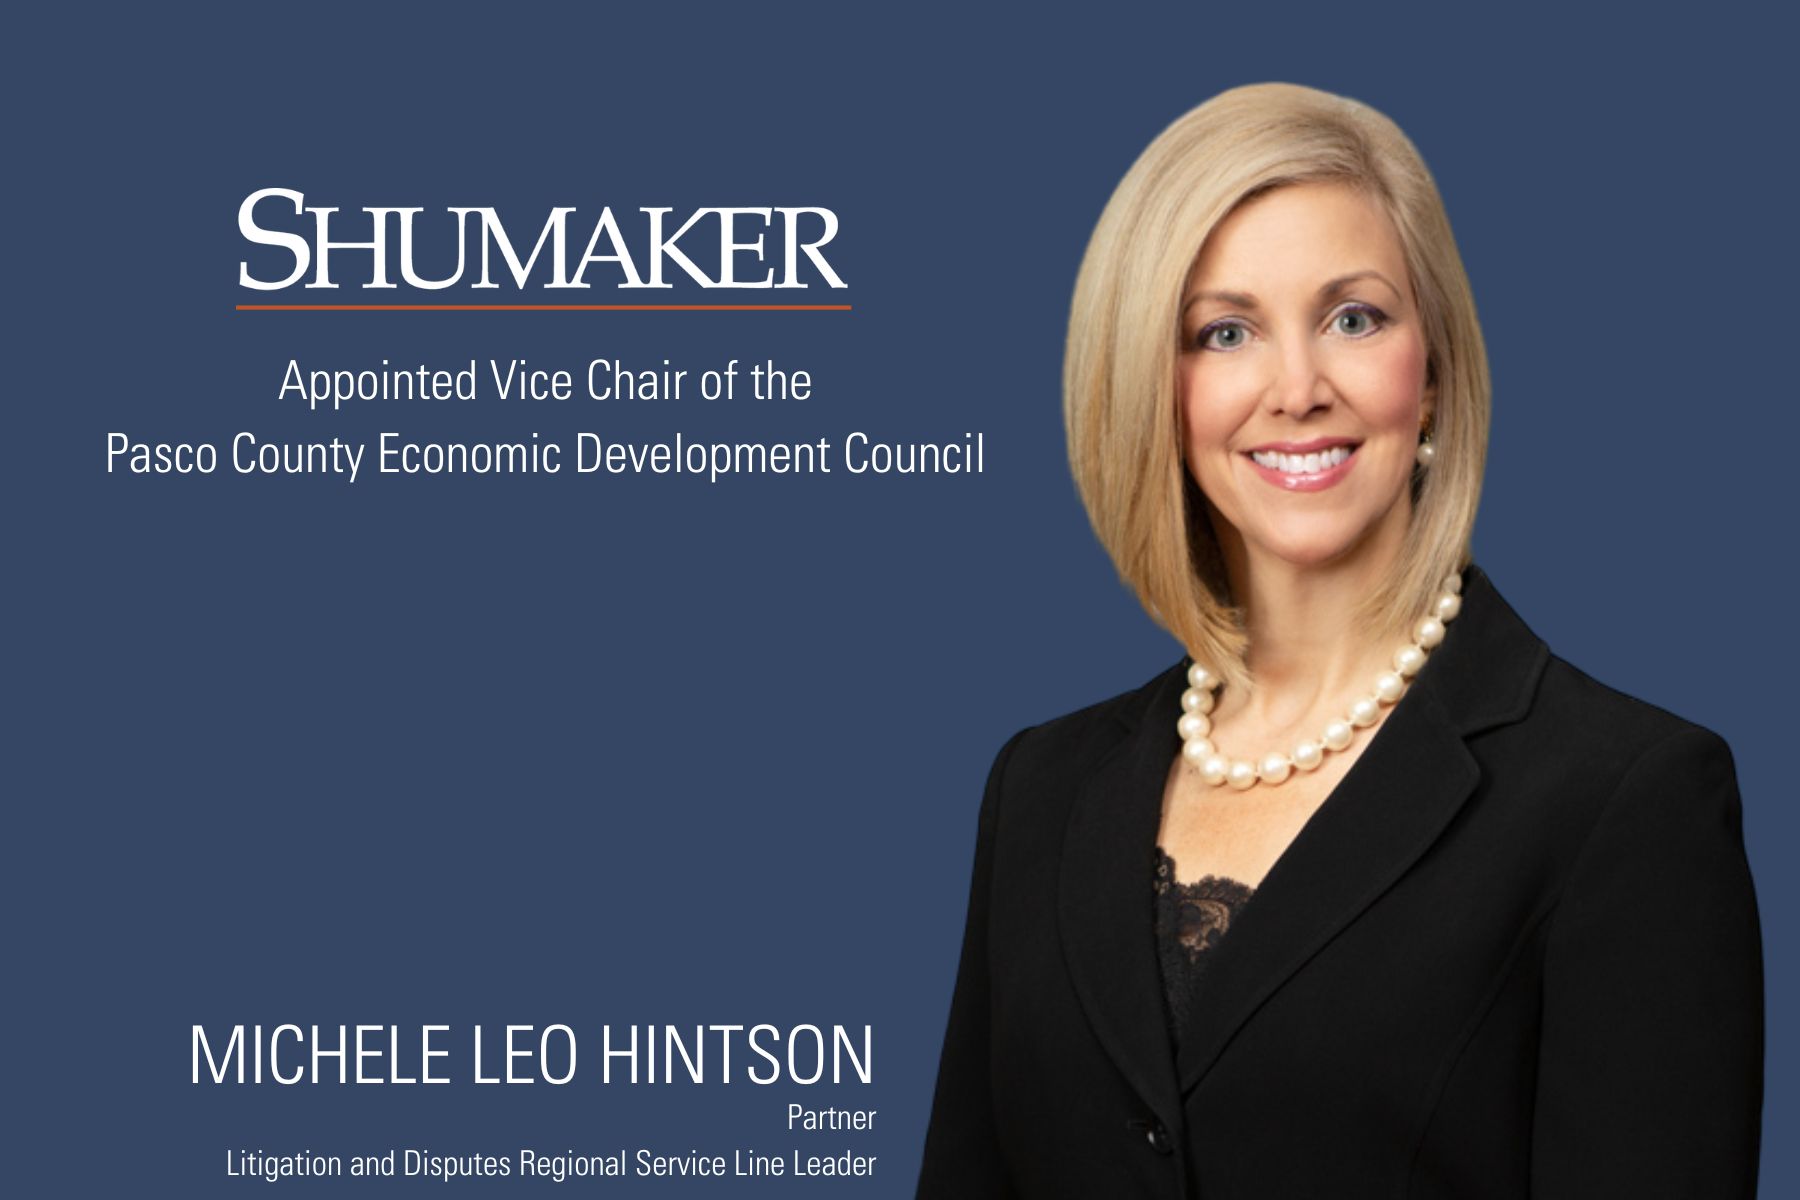 Michele Leo Hintson Named Vice Chair of Pasco County EDC